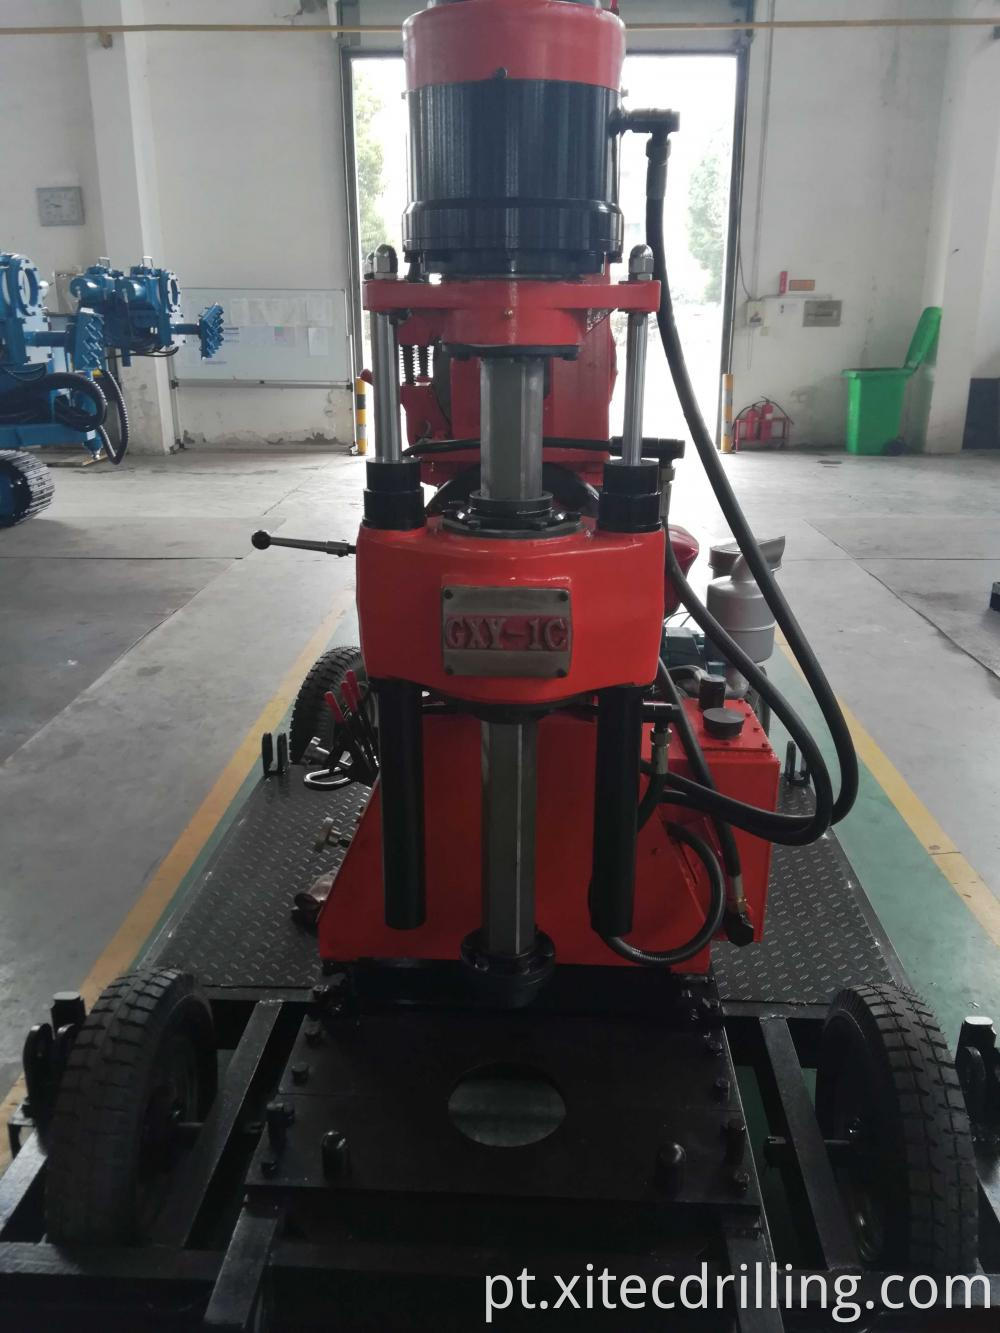 GXY-1C Exploration drilling With Low Rotary Speed Big Torque-1